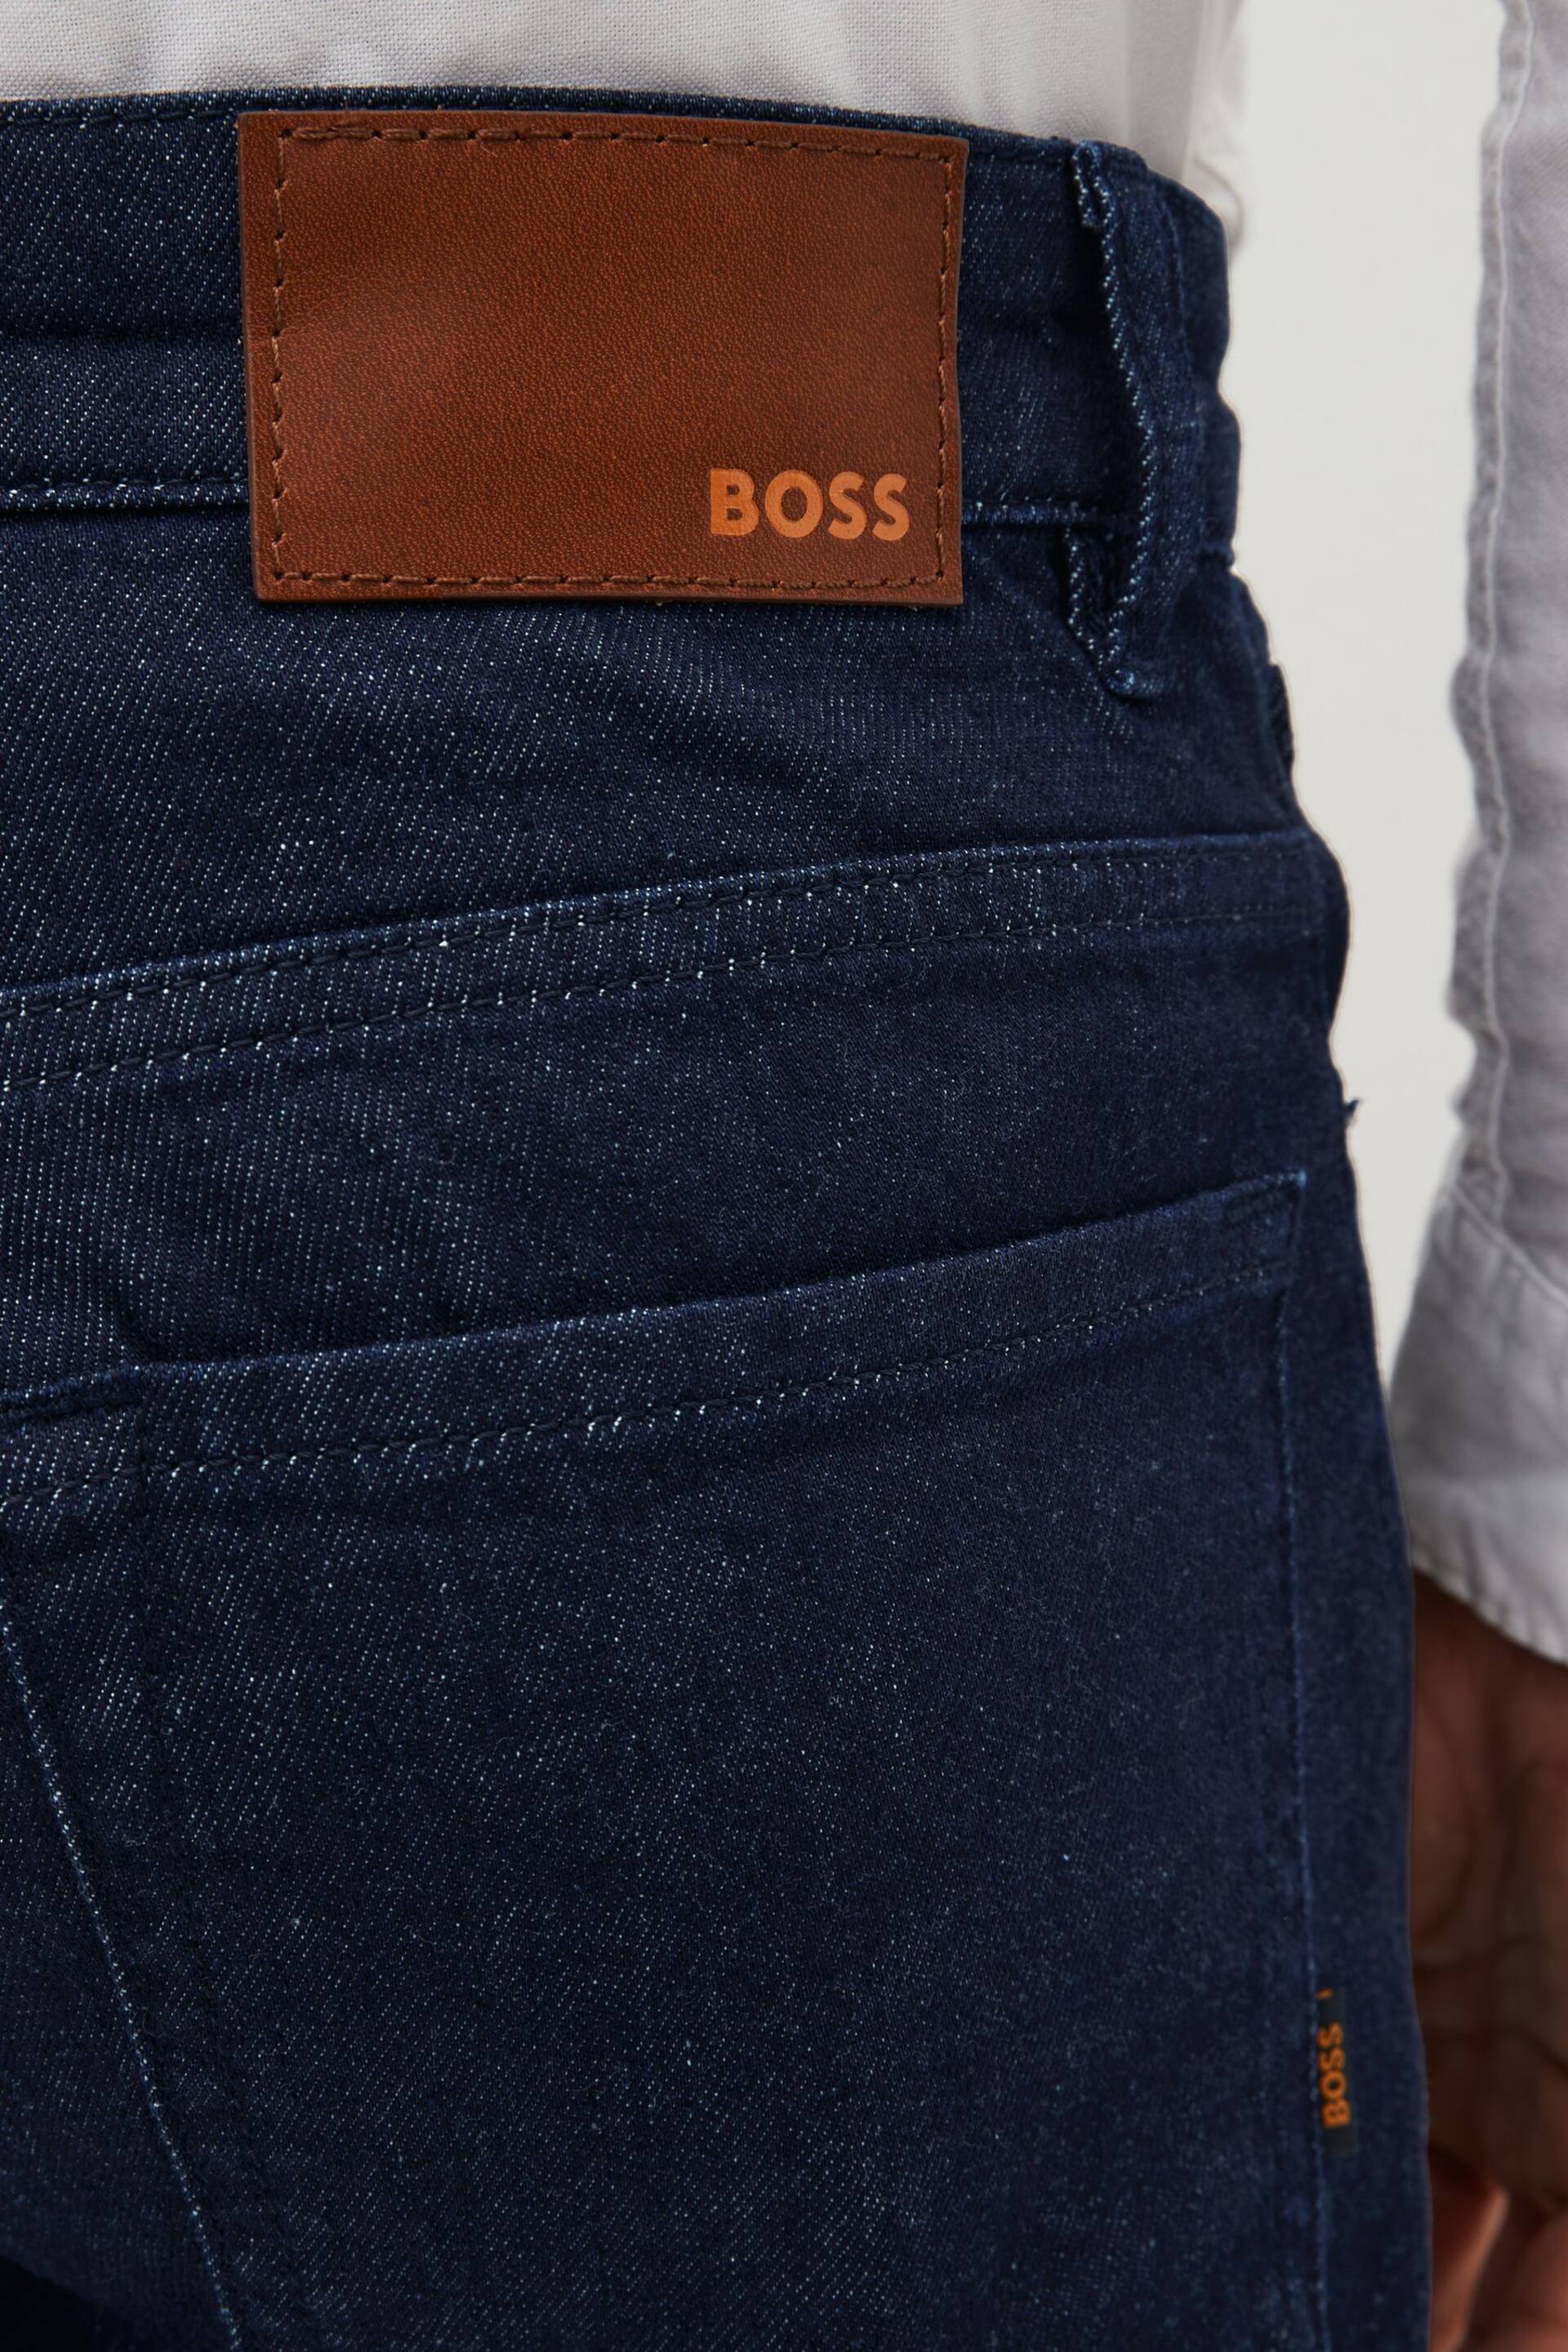 BOSS Indigo Blue Maine Straight Fit Stretch Jeans - Image 3 of 4